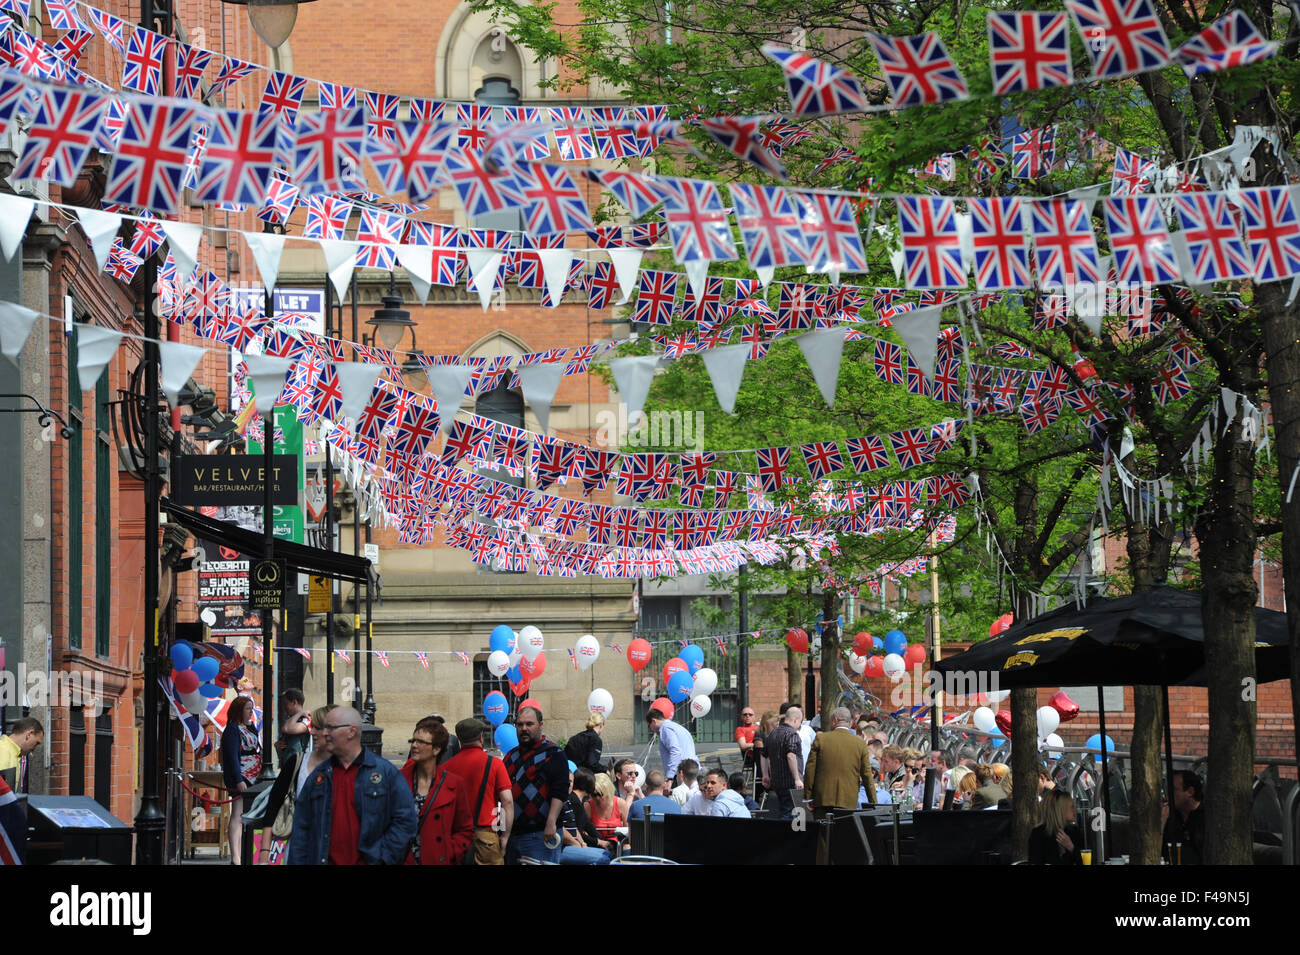 Party bunting on Canal Street in the heart of Manchester's Gay village to celebrate the wedding of William and Kate. Stock Photo